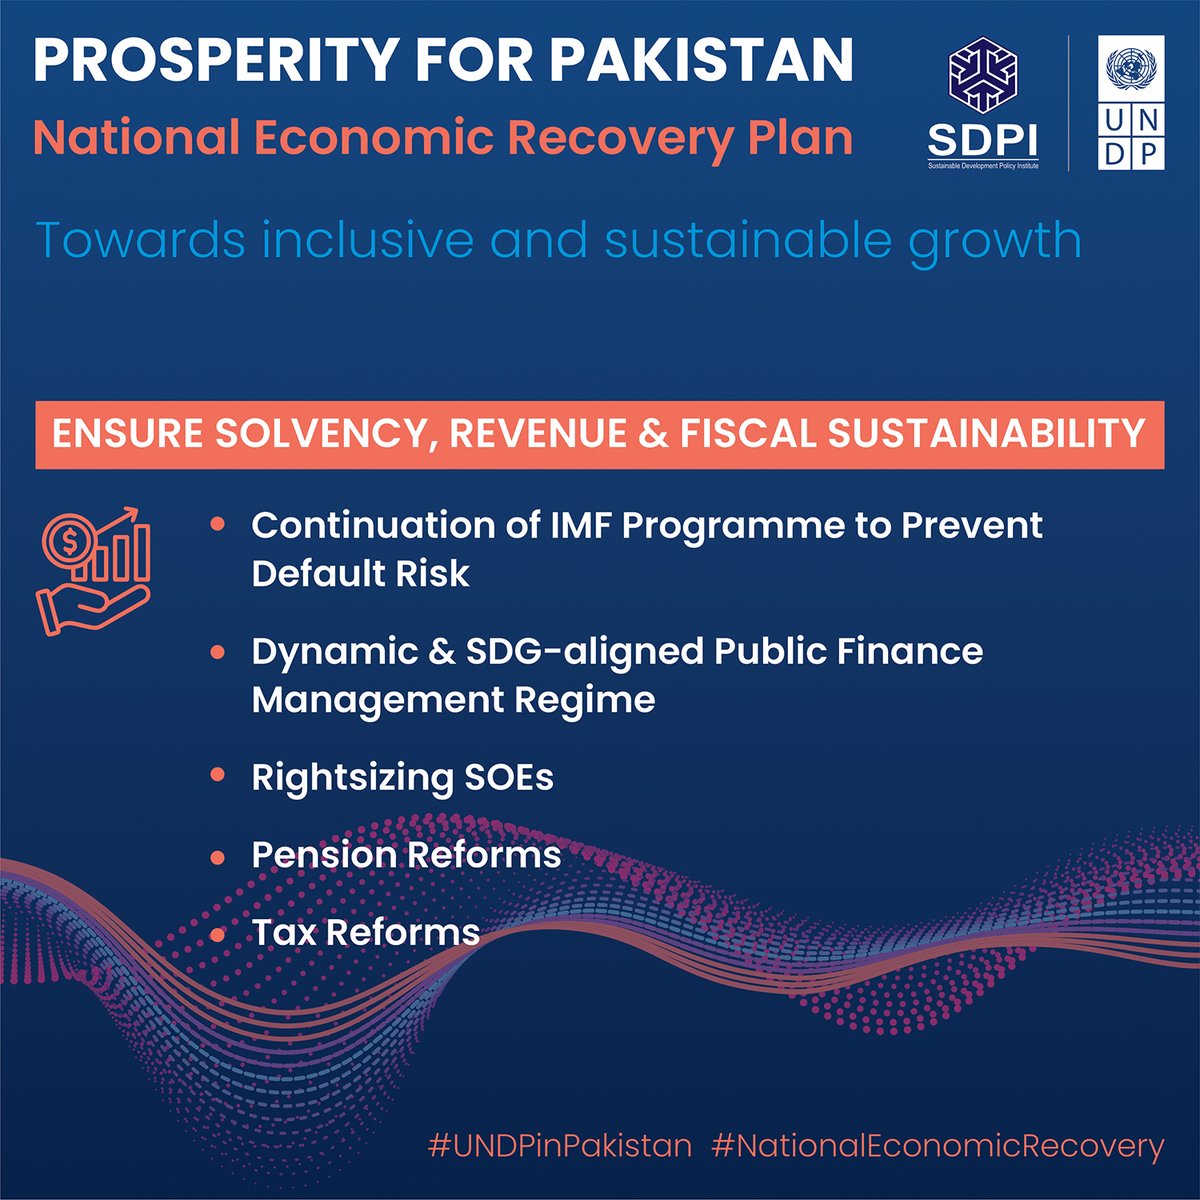 As part of our #ProsperityforPakistan initiative, #UNDPinPakistan & @SDPIPakistan, together with our High-Level Policy Advisory Committee Members, present a proposed National Economic Recovery Plan for Pakistan ➡️#TowardsSustainableandInclusiveGrowth Pillar I: Ensure solvency,